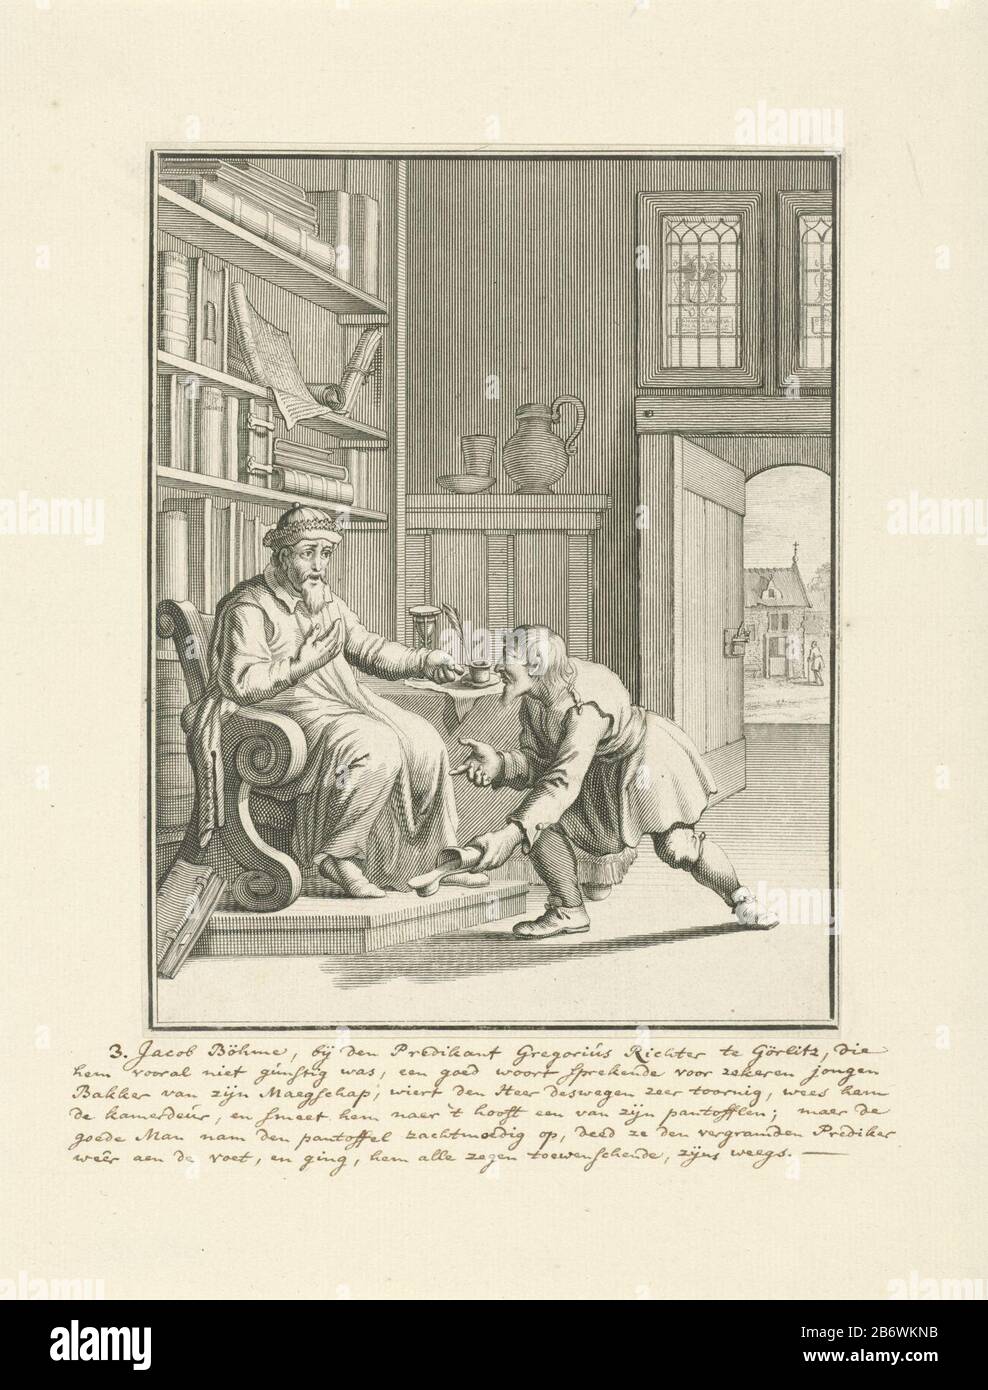 Jakob Böhme takes a slipper back to Father Gregor Richter. Richter, who accused Boehme of heresy, the slipper to his head had gegooid. Manufacturer : printmaker Joseph Mulder to design: Jan Luyken (possible) publisher John Krelliusuitgever: Fredrik Vorster Place manufacture: Amsterdam Date: 1686 Physical features: engra and etching material: paper Technique : engra (printing process) / etching dimensions: sheet: 181 mm × h 142 b mmToelichtingPrent of: Böhme, Jacob. All the theosoophsche or godwĳze work. Amsterdam: John Krellius and Fredrik Vorster, 1686. Subject: shoes, sandals (+ men's clothe Stock Photo